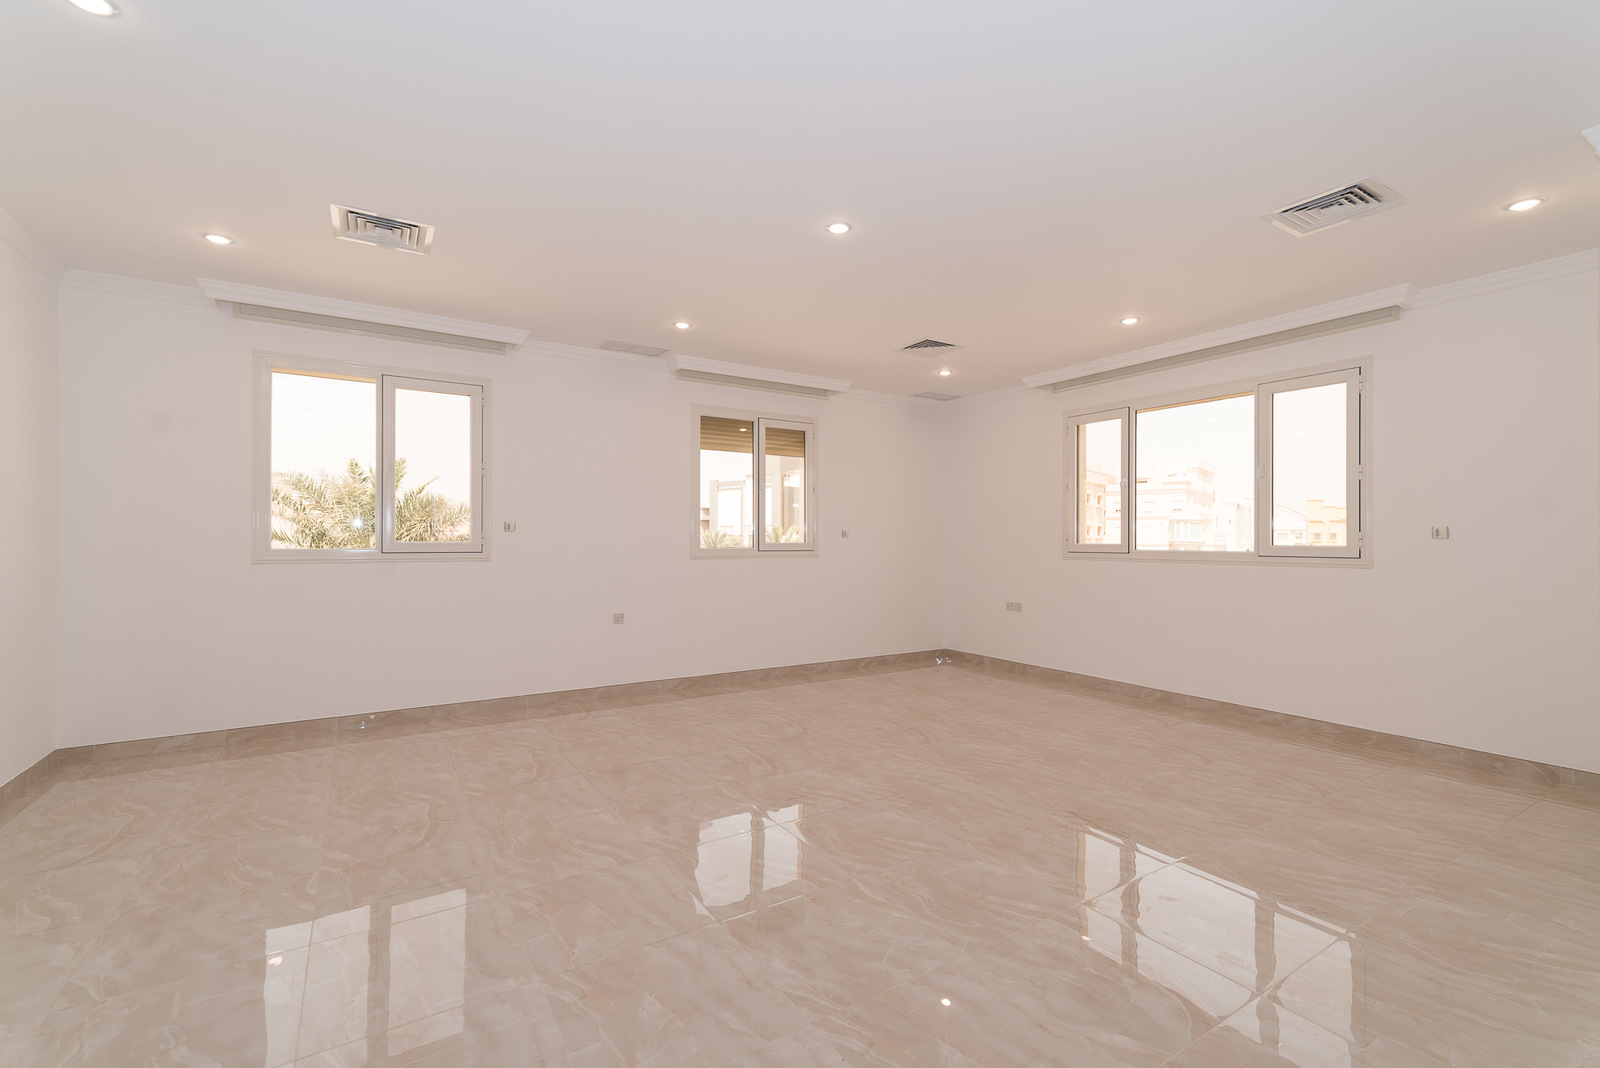 Salam – spacious, new, unfurnished, four bedroom floors